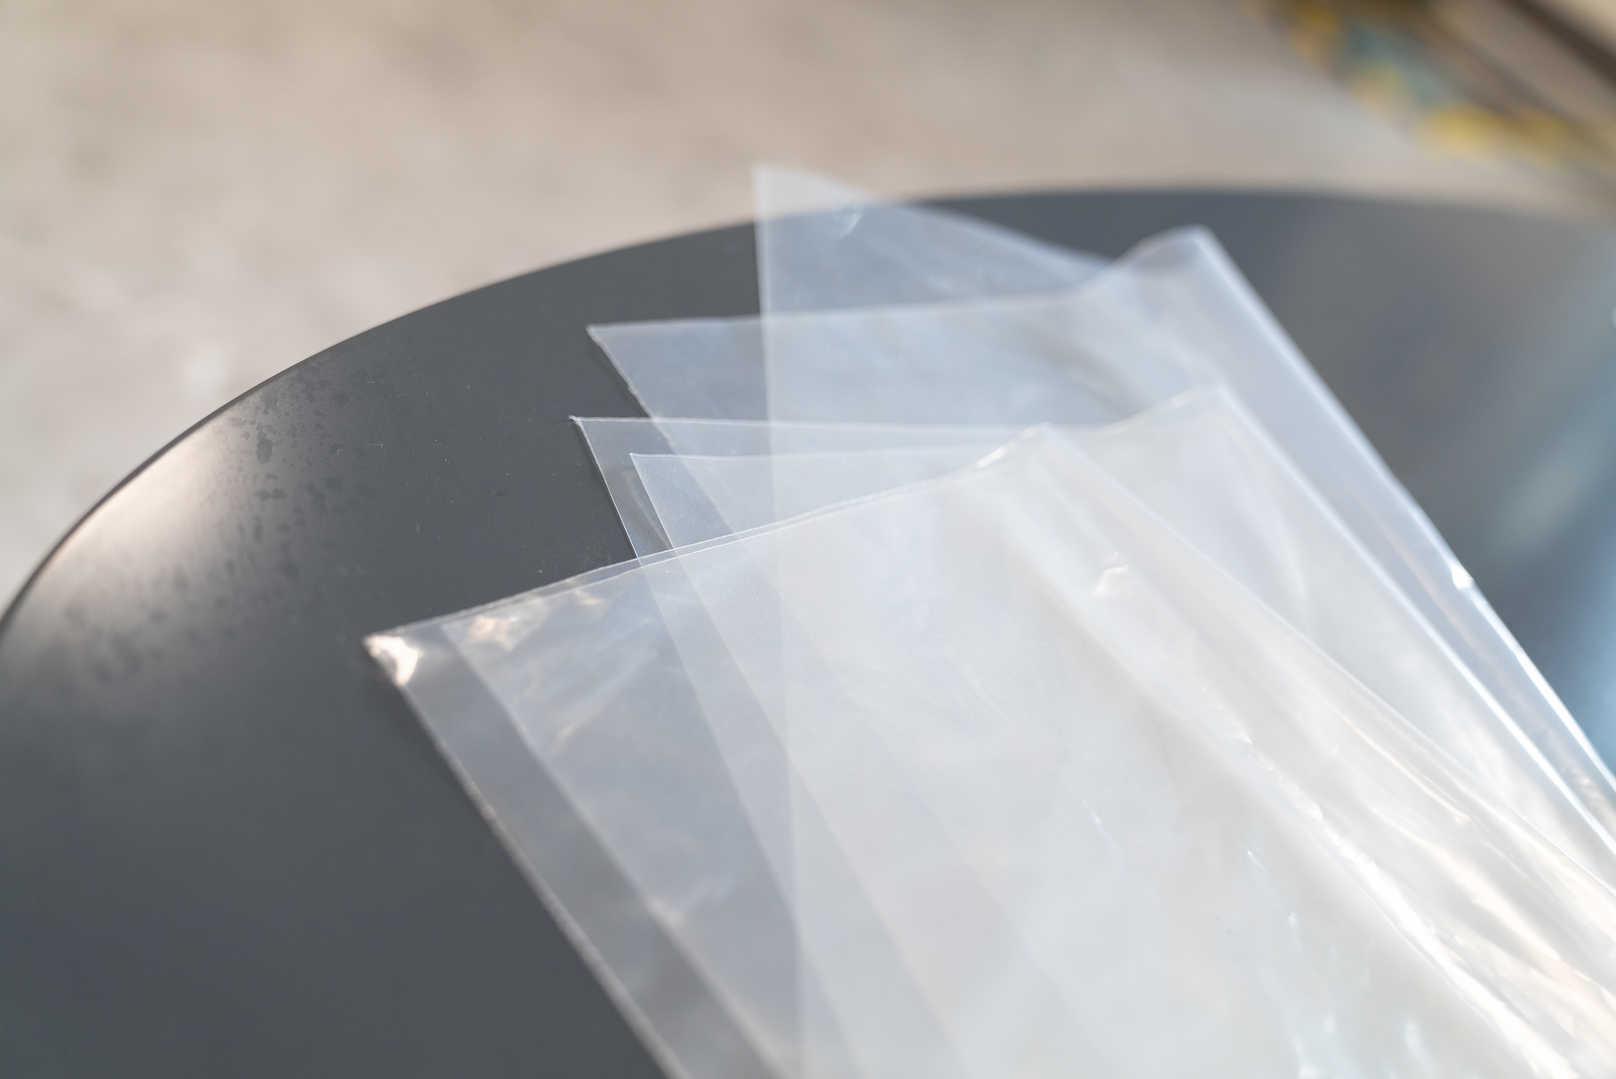 Bioplastic produce bags offer compostability | Food Engineering